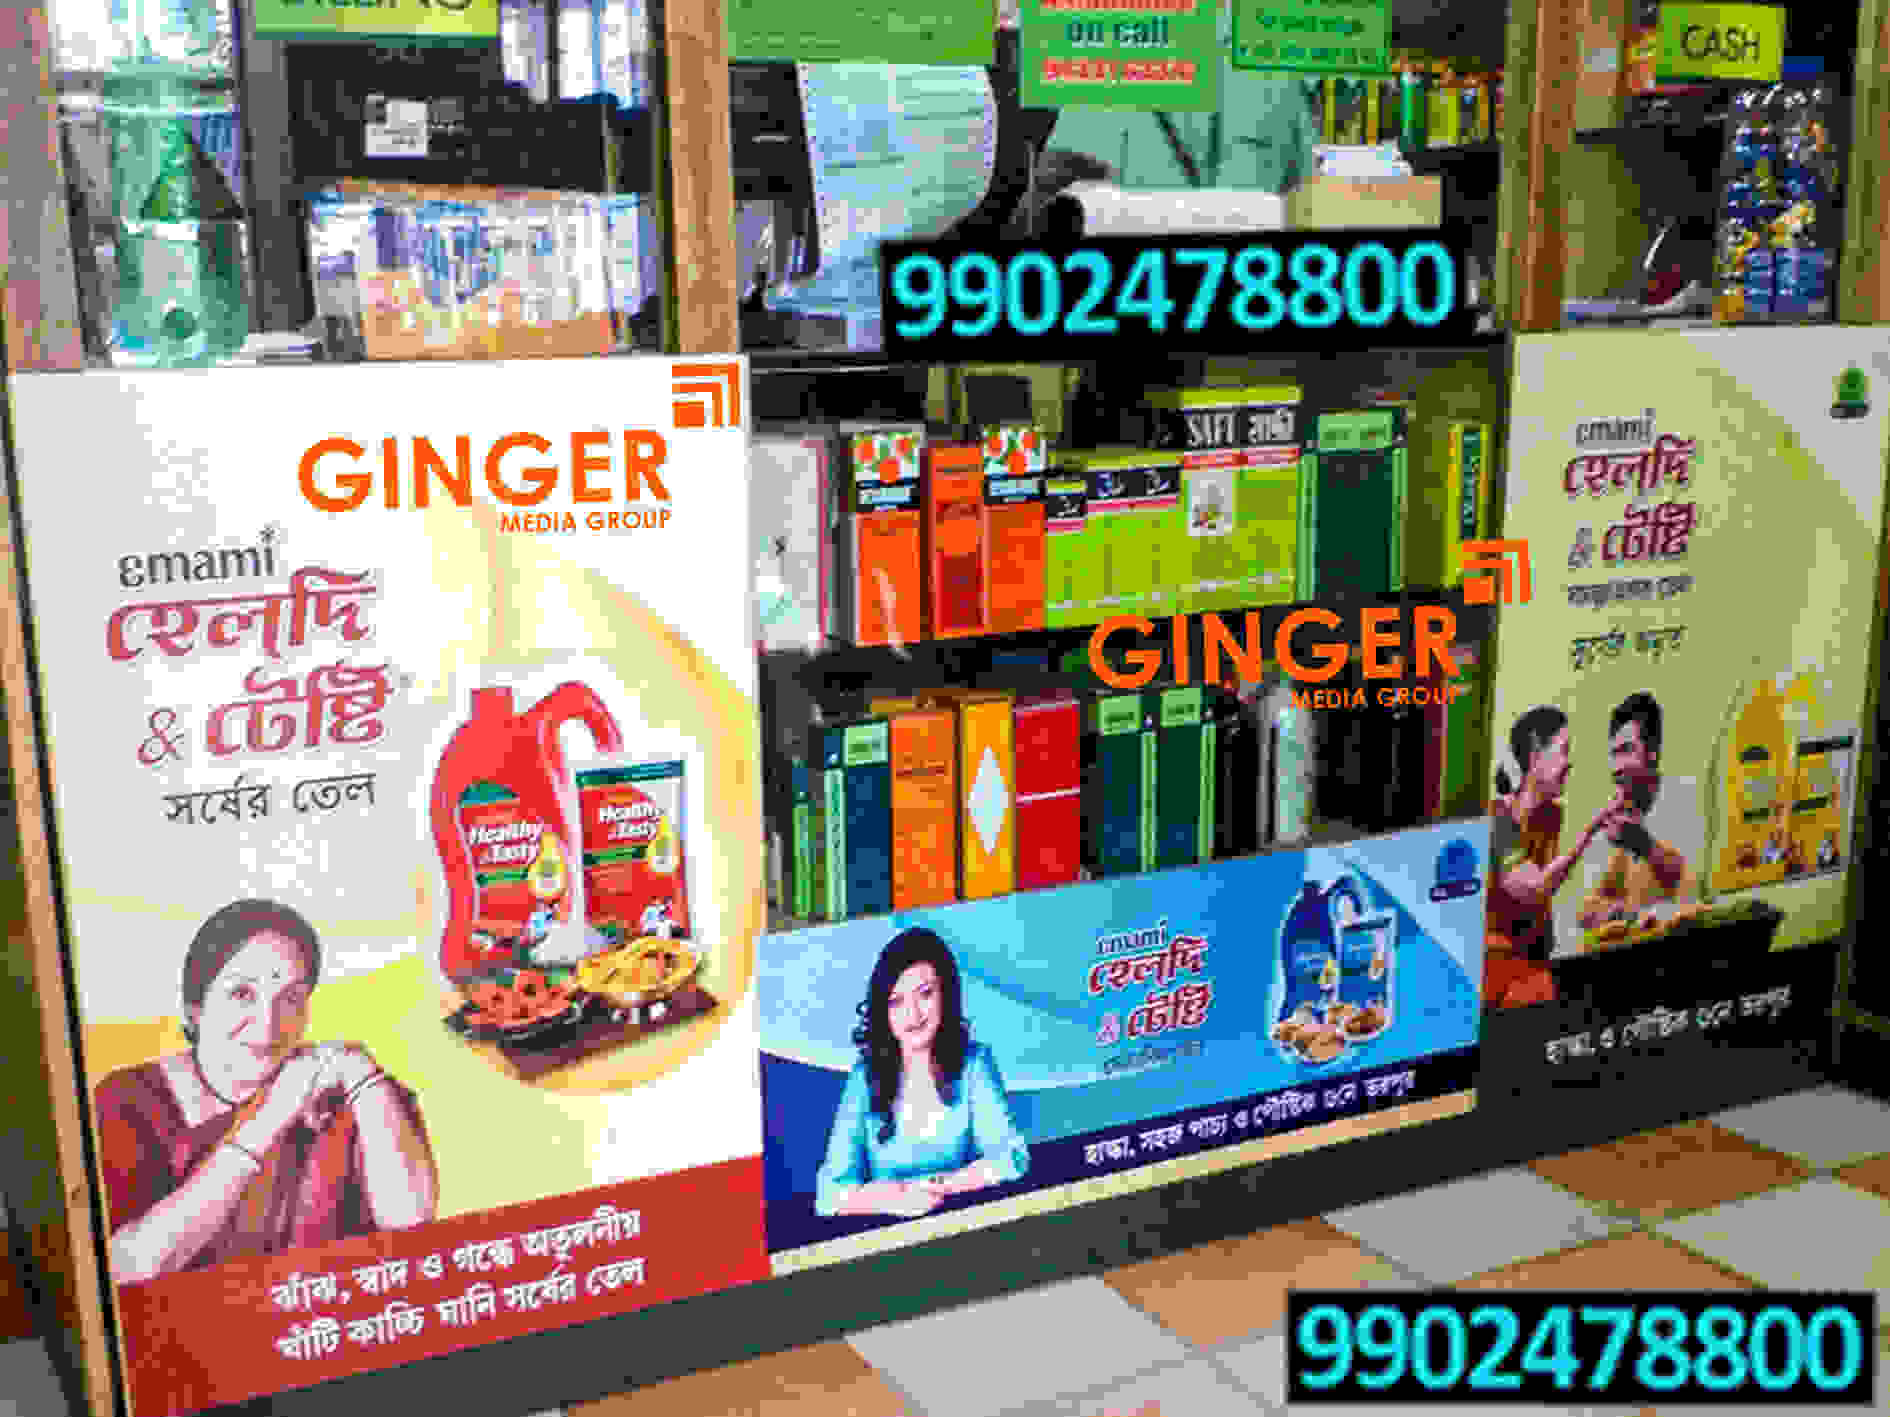 Retail Branding in India for Emami Oil